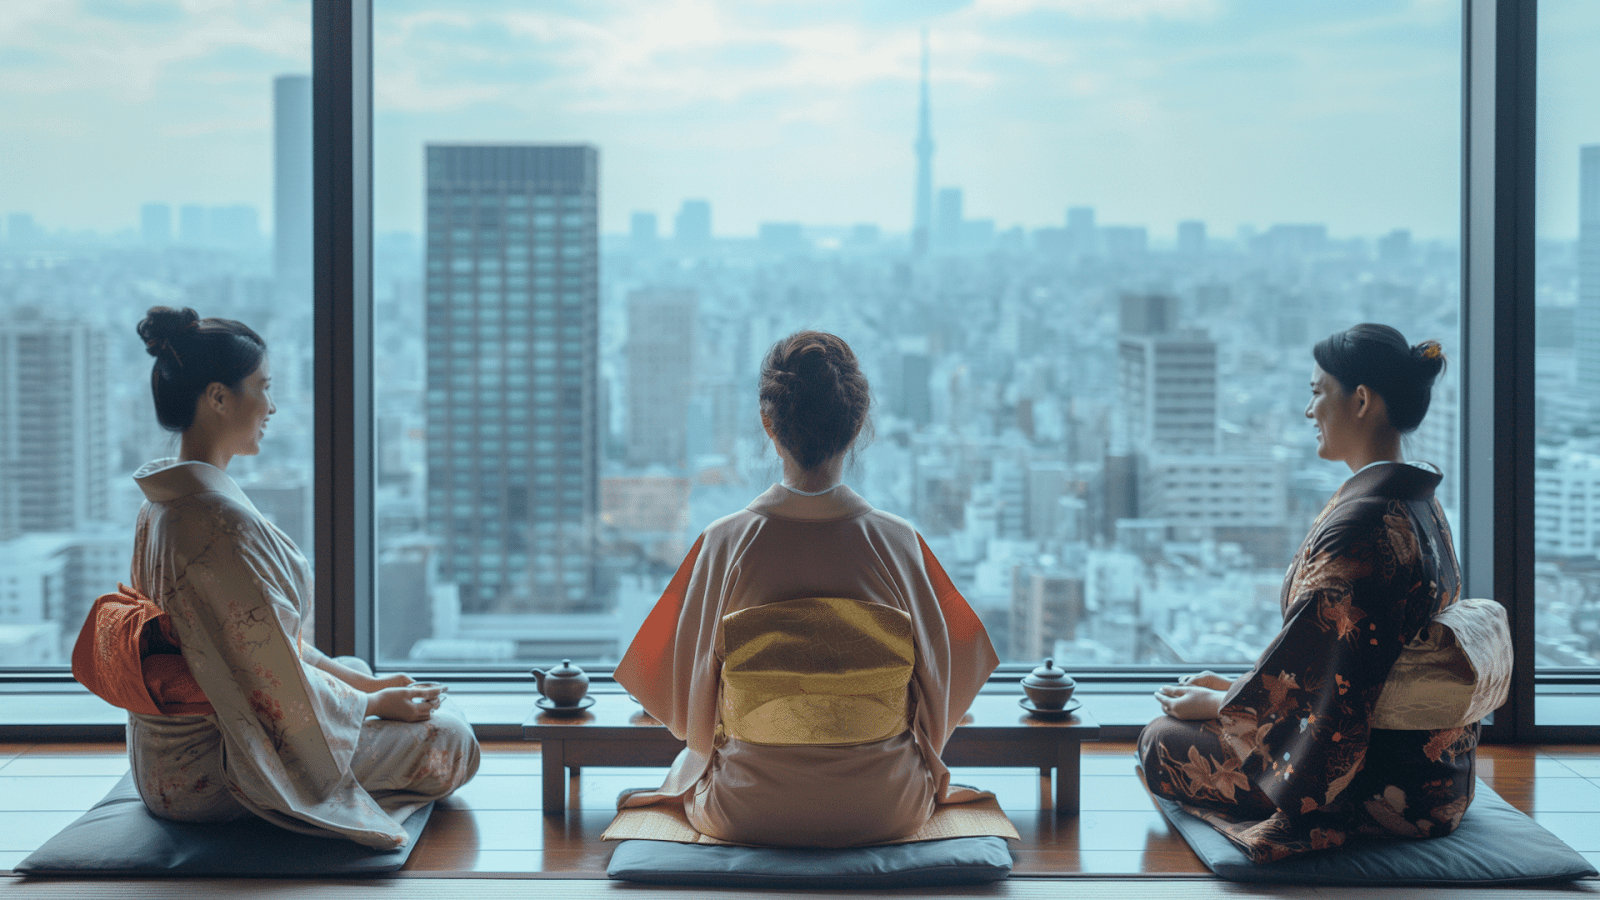 Women in kimonos drink tea in a high-rise hotel in Asia for cultural experiences